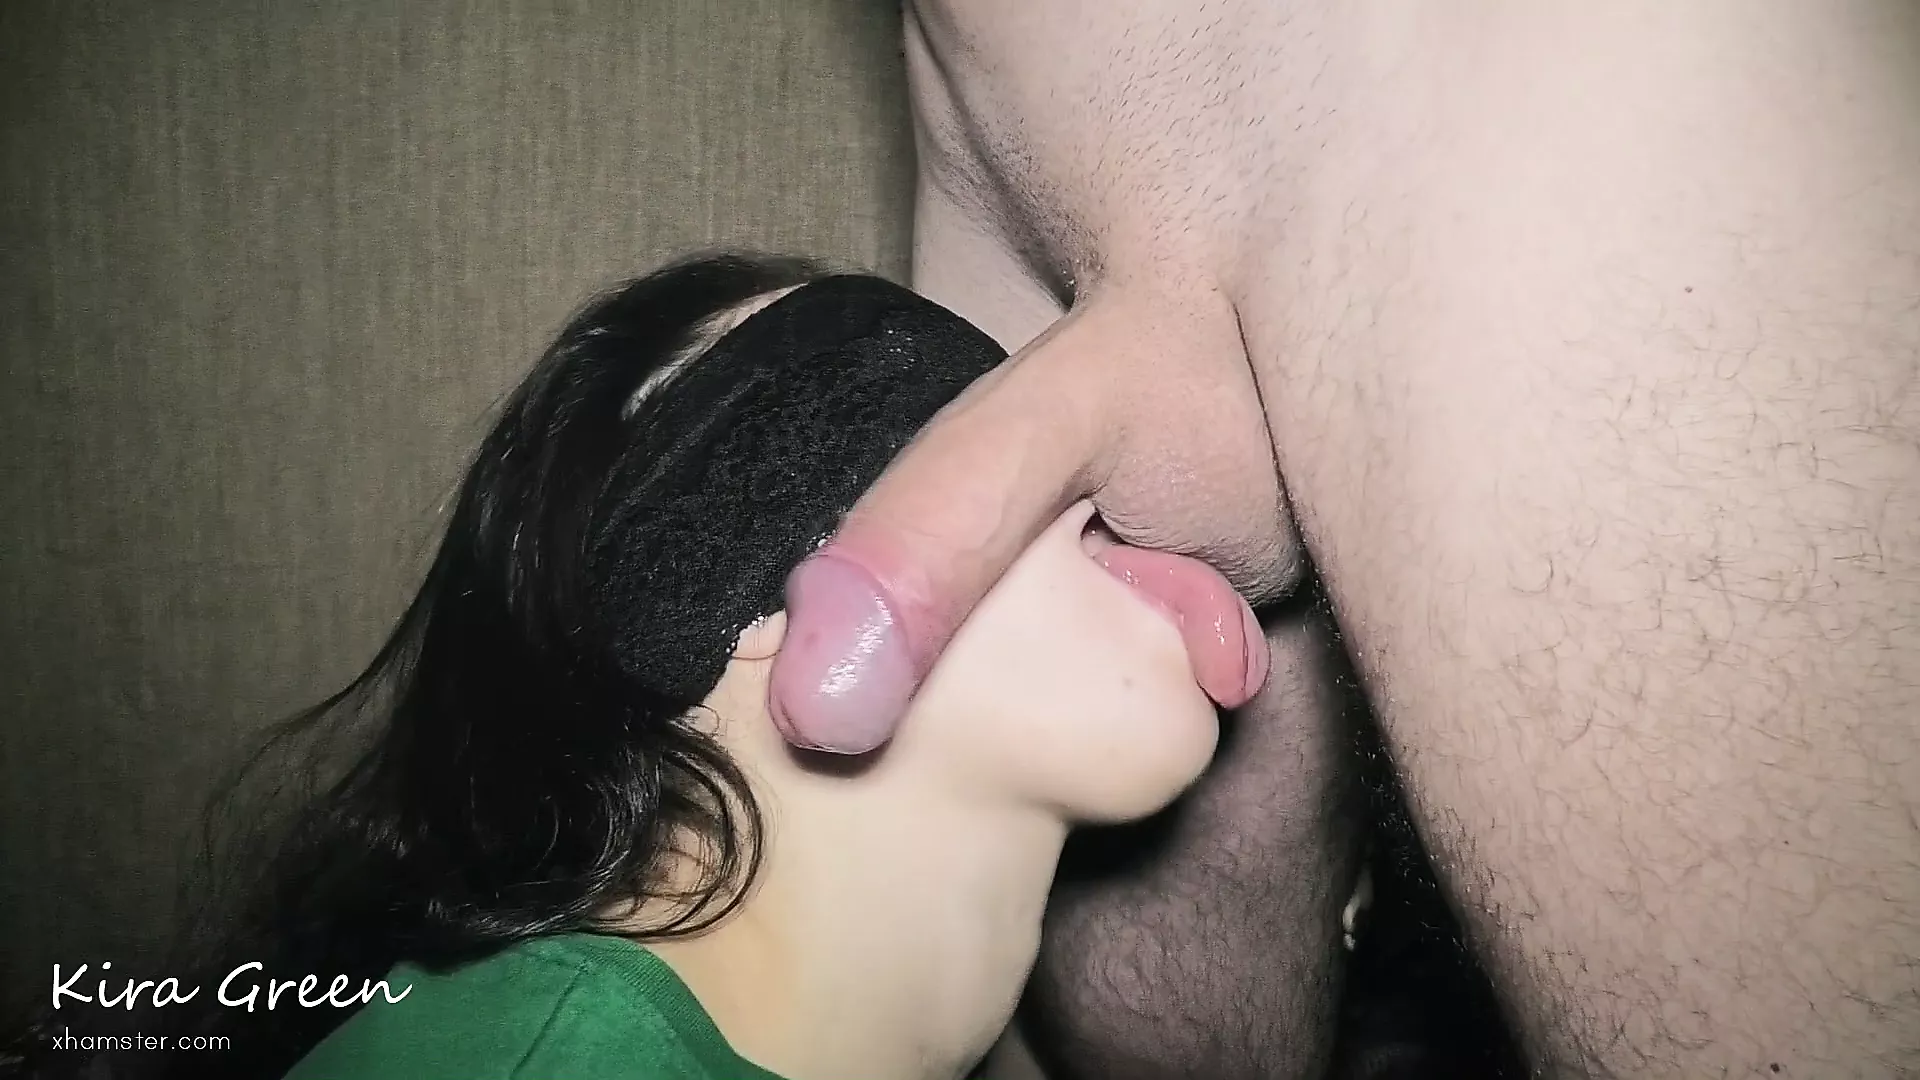 Blowjob and Rimming, licking and sucking balls, threesome